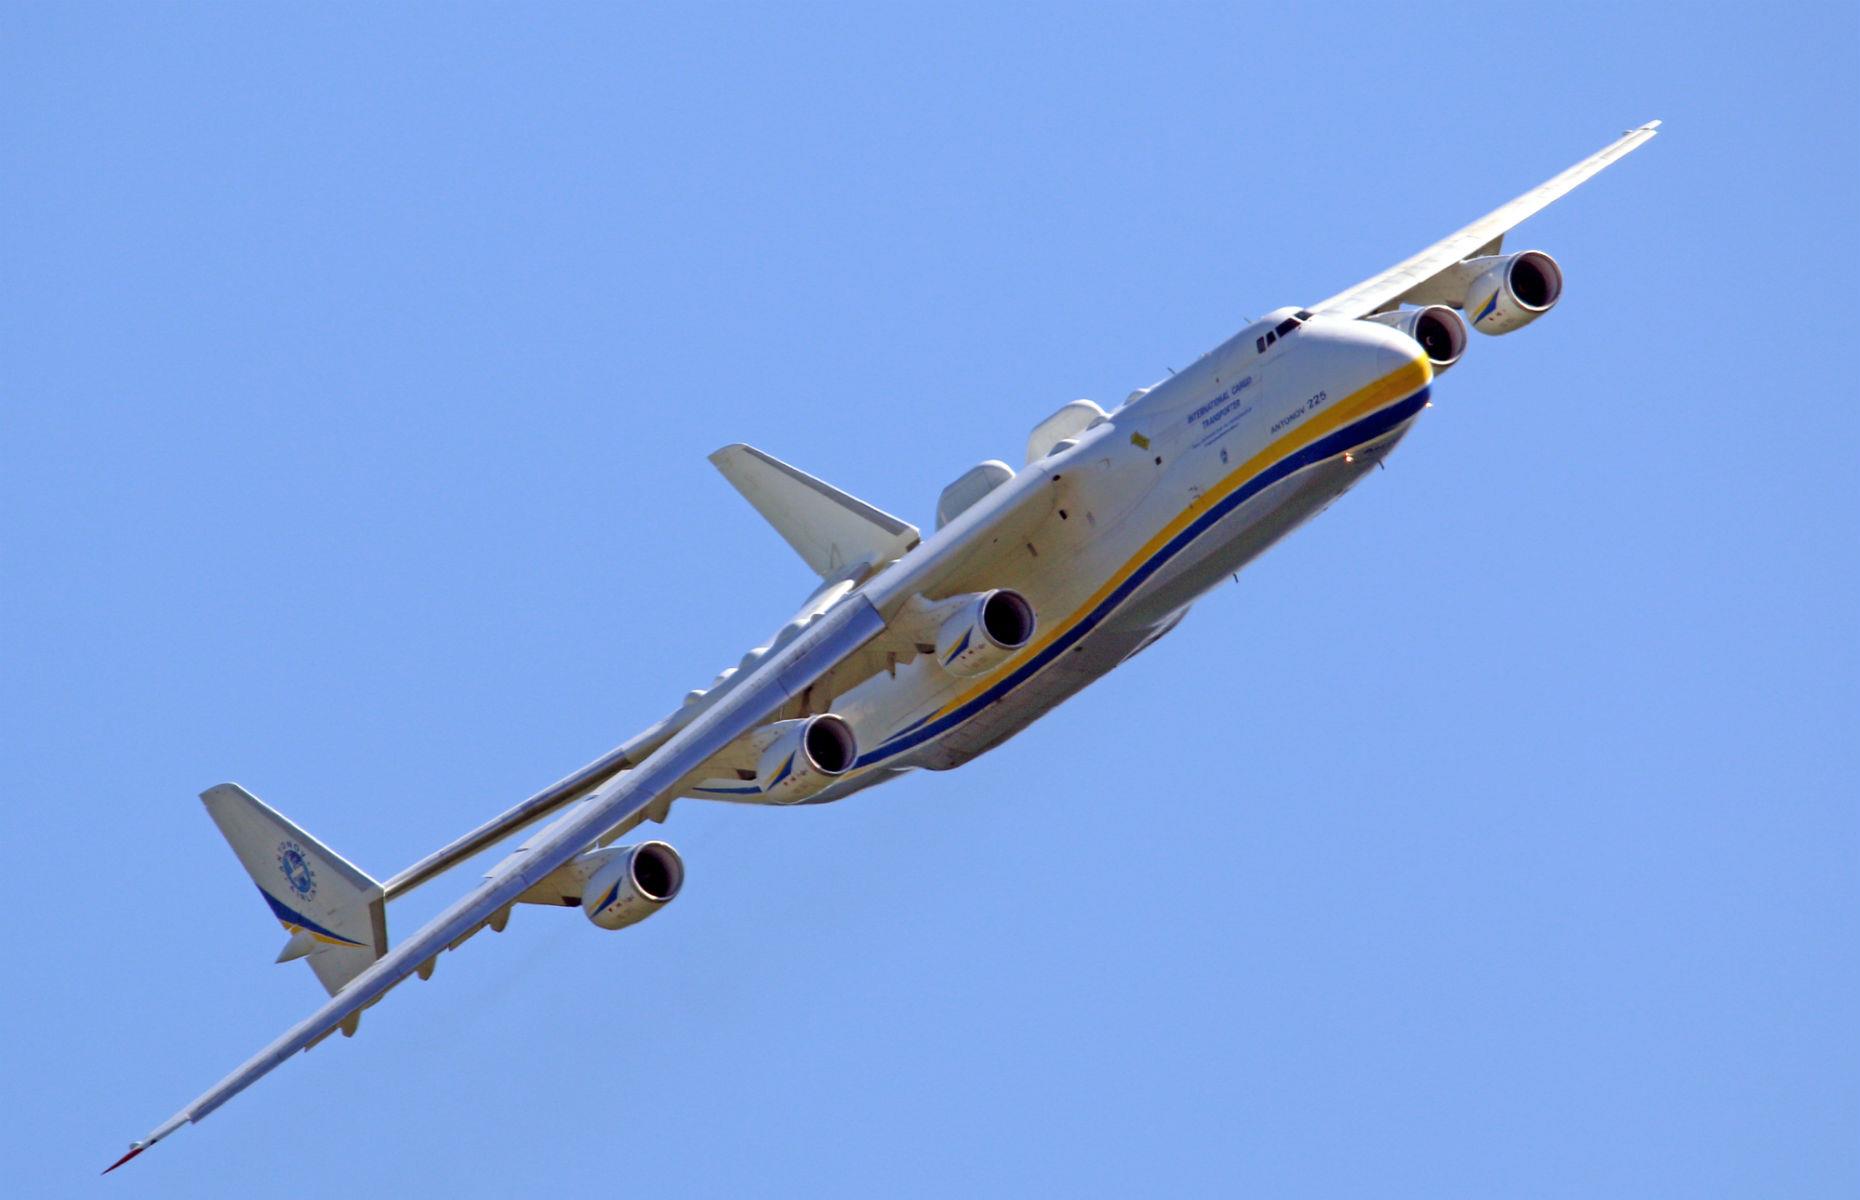 <p>It's not the largest plane by wingspan, but the 284-tonne Antonov AN-225 Mriya is the largest aircraft ever built by weight – one of a range of world records held by the plane. It was developed in the 1980s to transport the Buran space shuttle between facilities in the former Soviet Union. After the collapse of the Soviet Union, the AN-225 found new life as a heavy-duty cargo carrier for Ukrainian aviation company Antonov.</p>